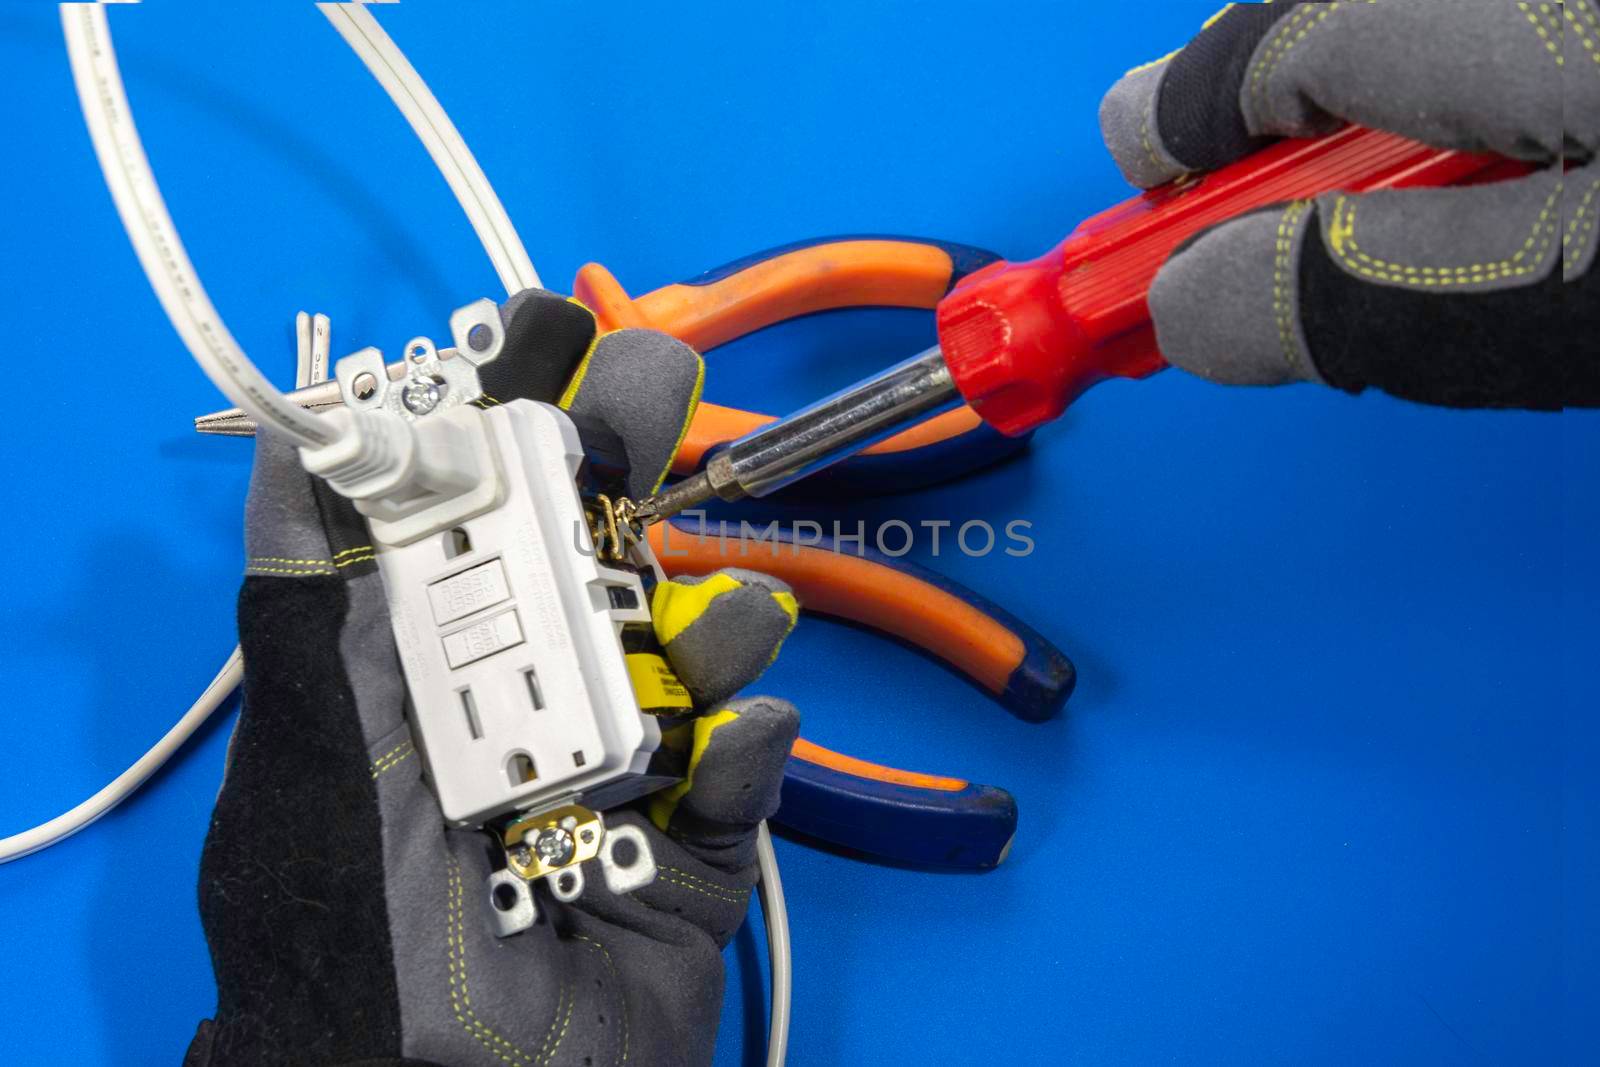 An electrician holds a power socket with a hand in a glove and fixes a screw with a screwdriver